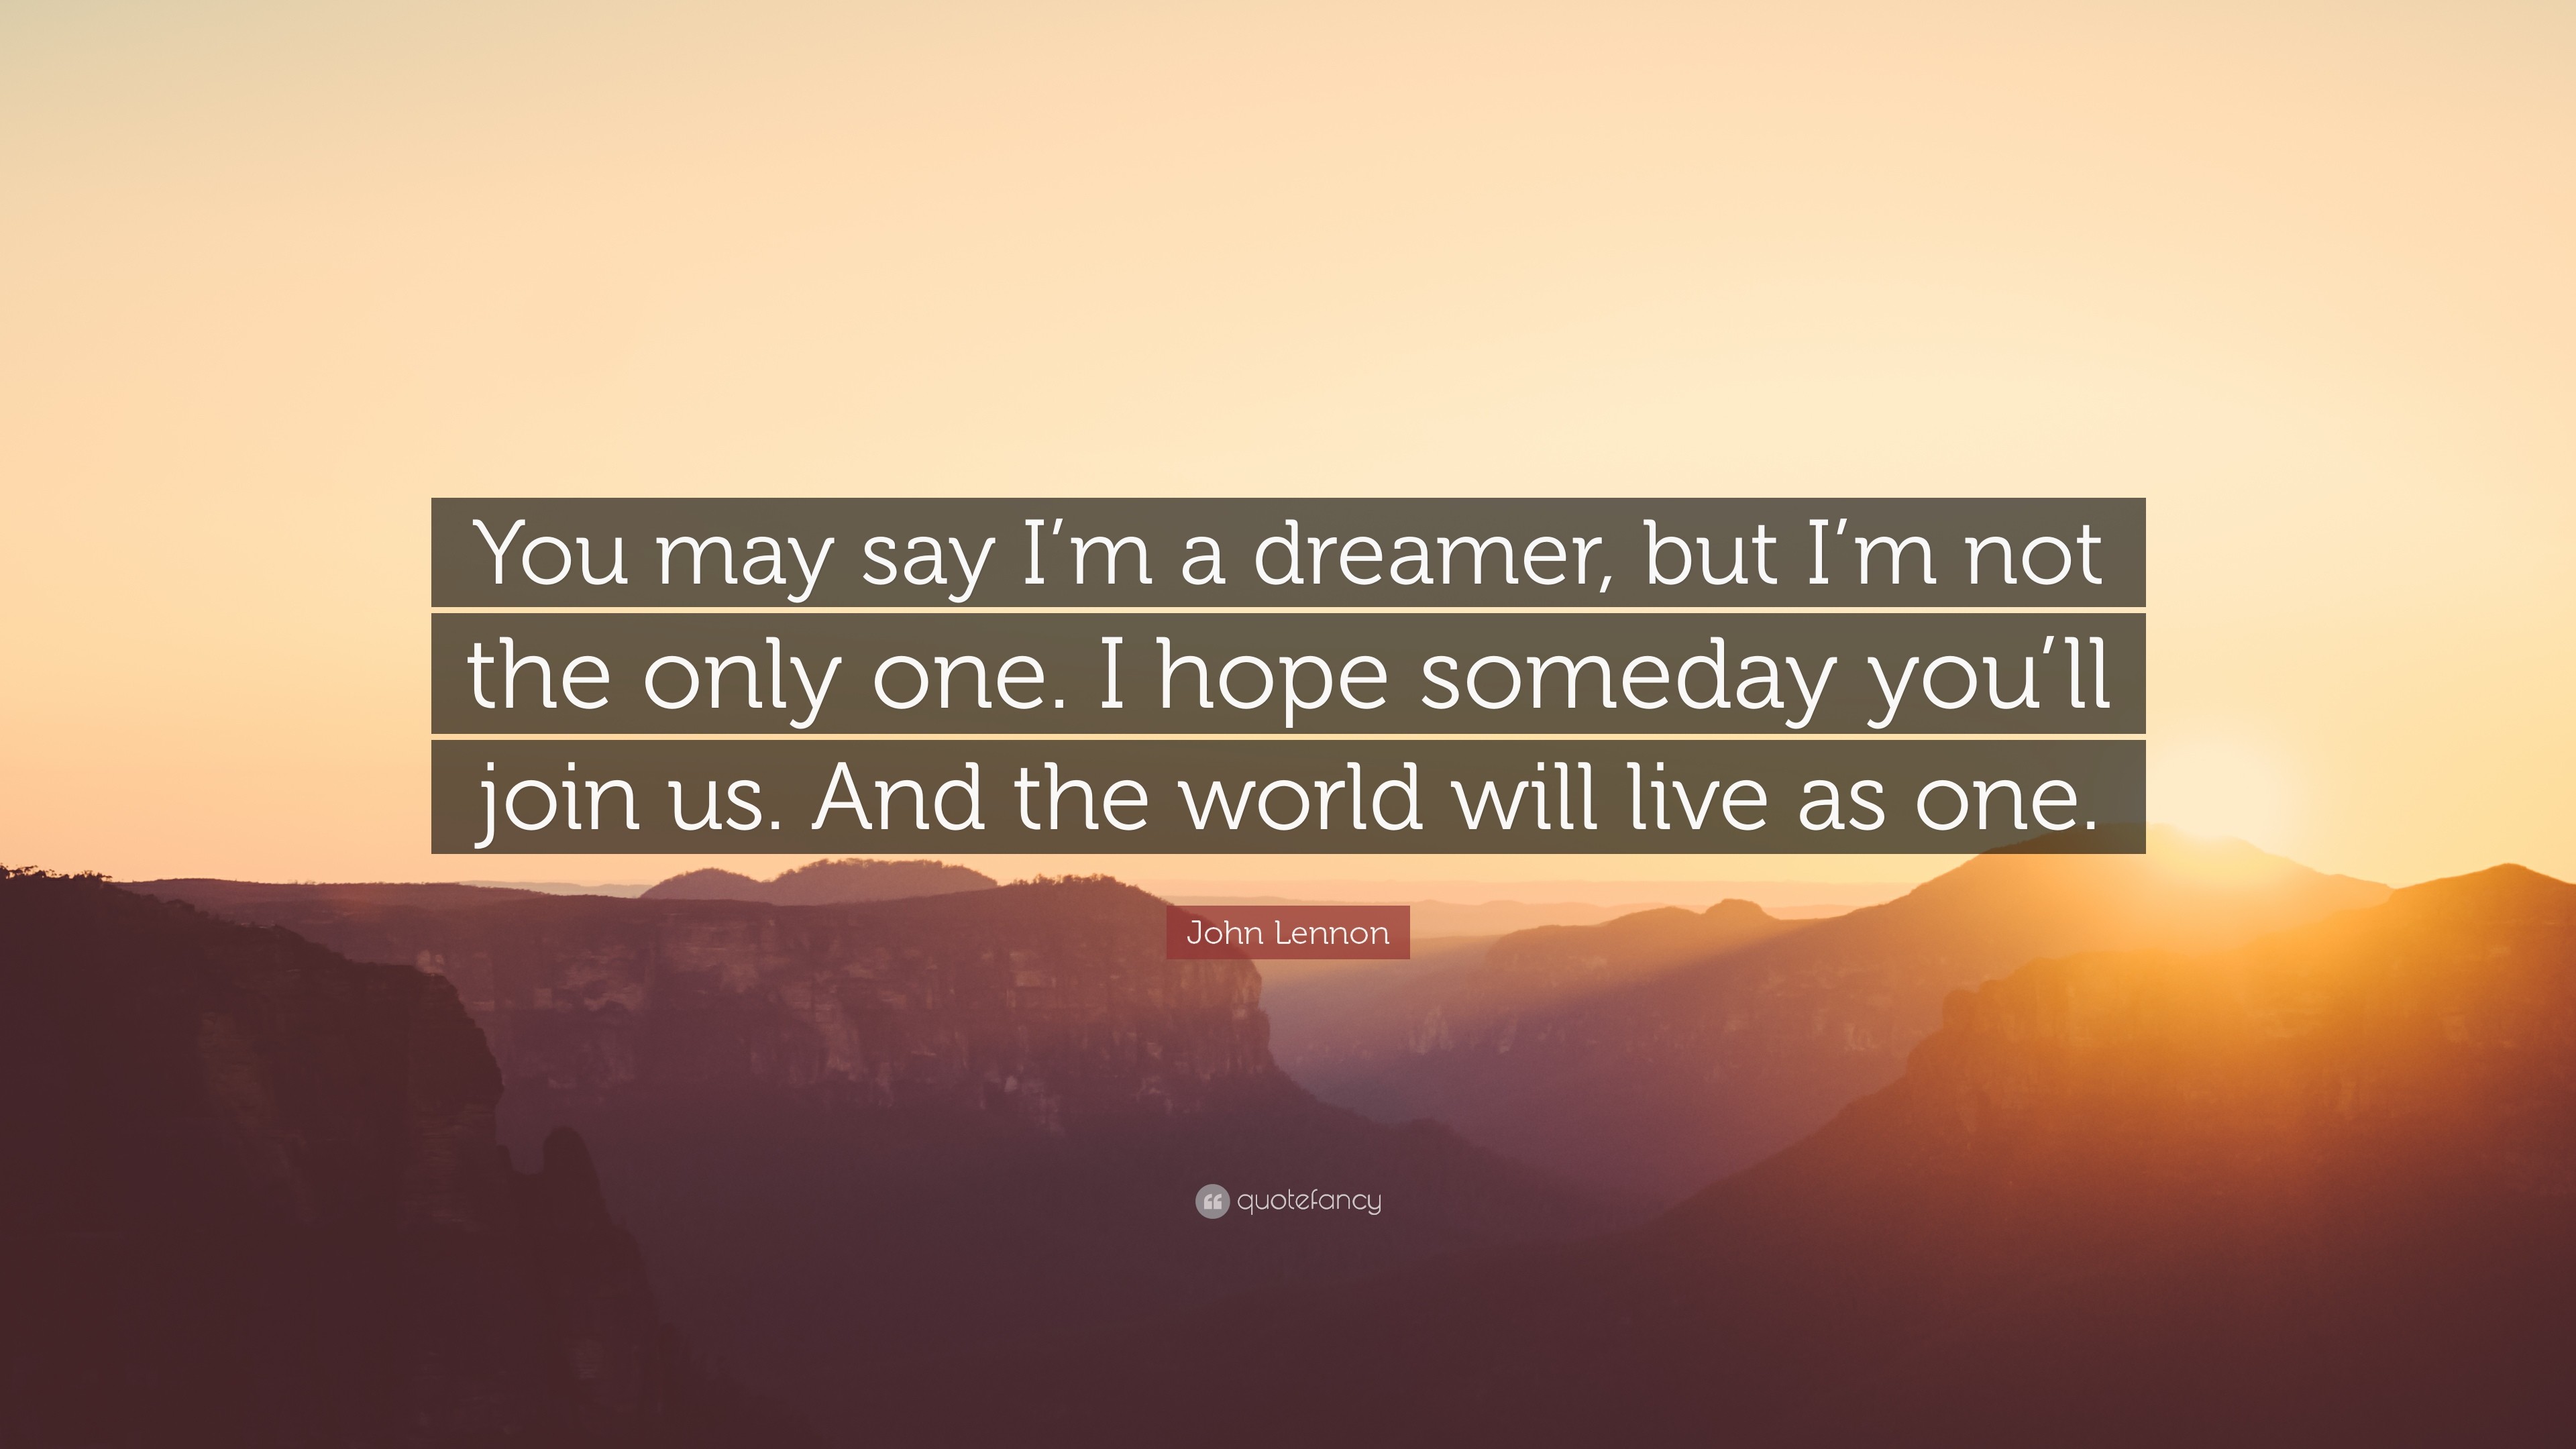 3840x2160 John Lennon Quote: “You may say I'm a dreamer, but I